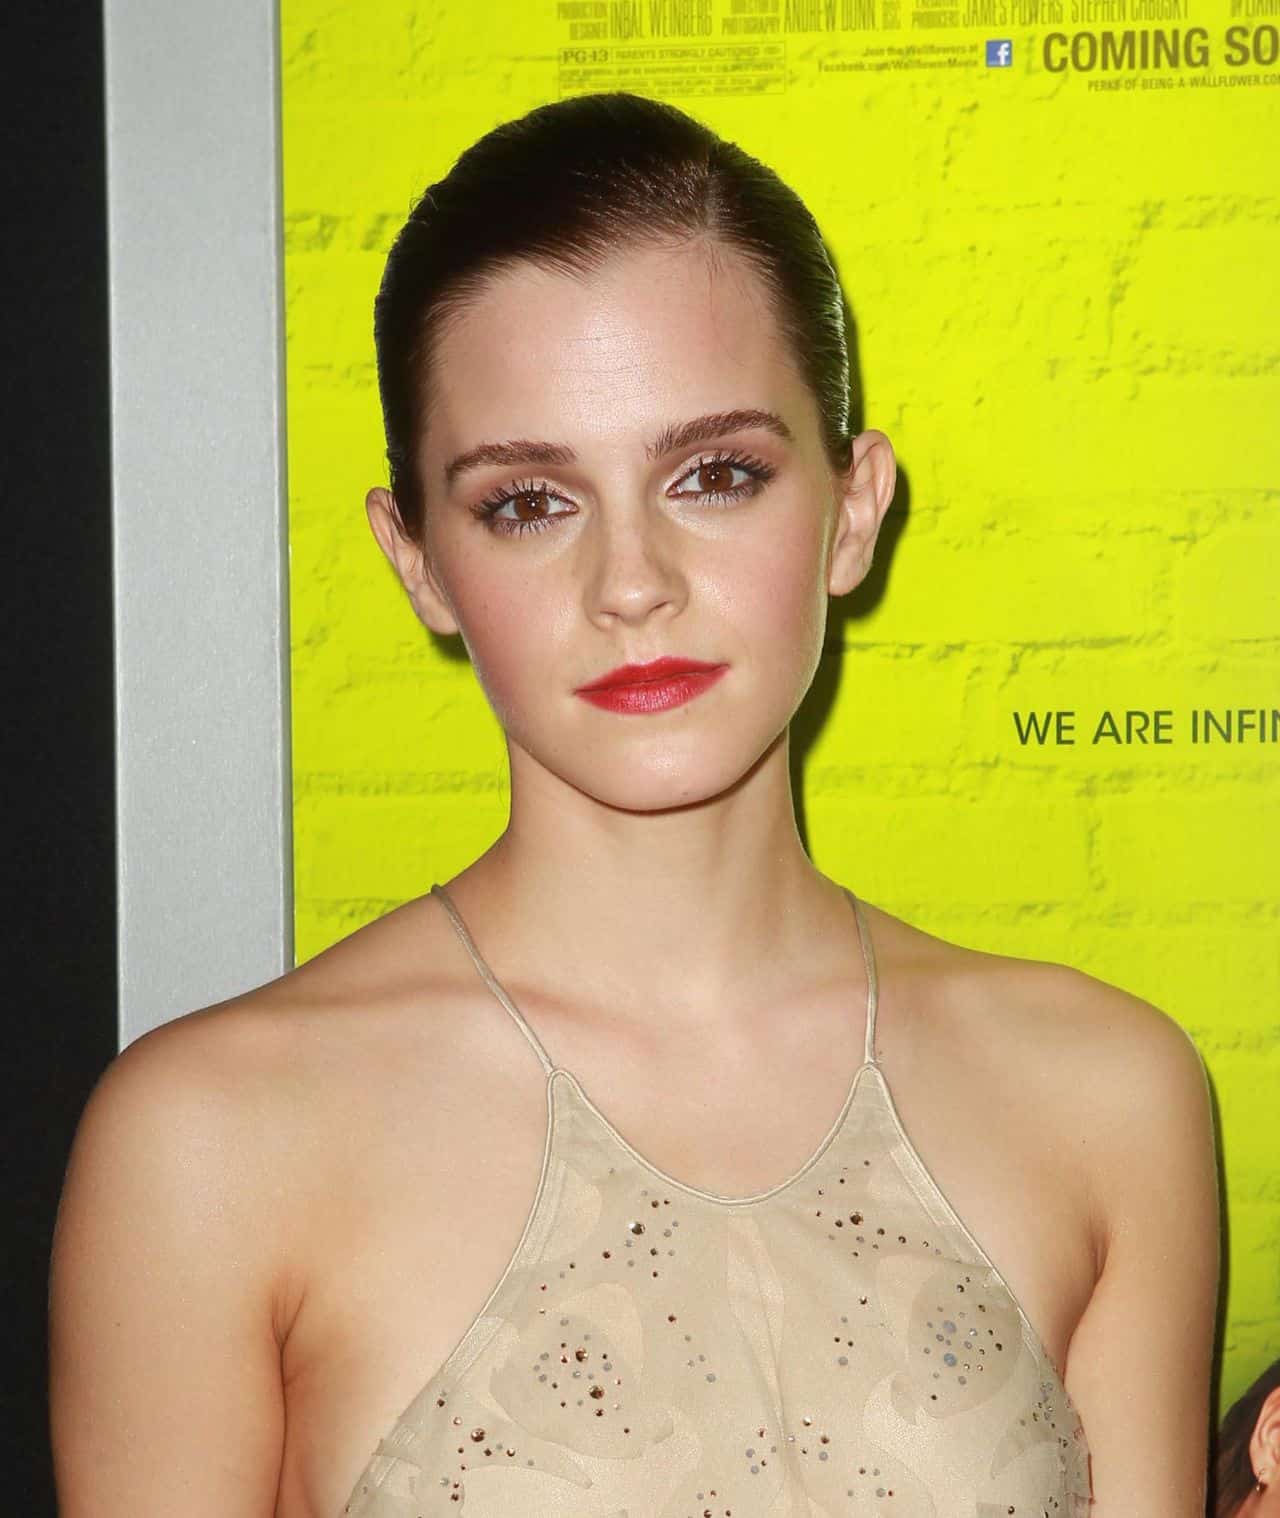 Emma Watson Sparkle at the Premiere of The Perks of Being a Wallflower